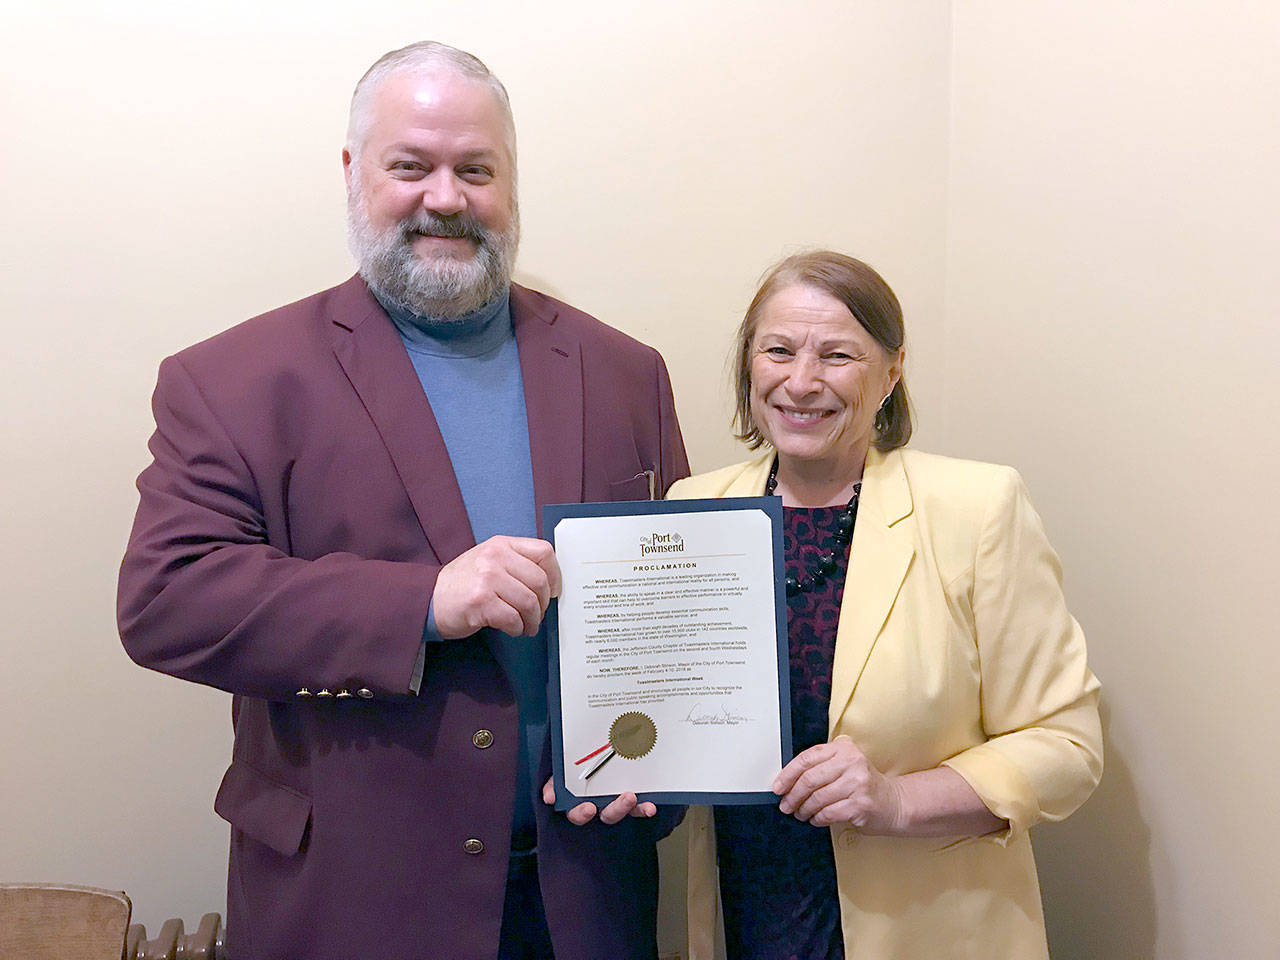 Port Townsend Mayor Deborah Stinson proclaimed the week of Feb. 4-10 as Toastmasters International Week during the Feb. 5 City Council meeting. Toastmasters Kyle Hall, left, and Jan McDonald accepted the proclamation.